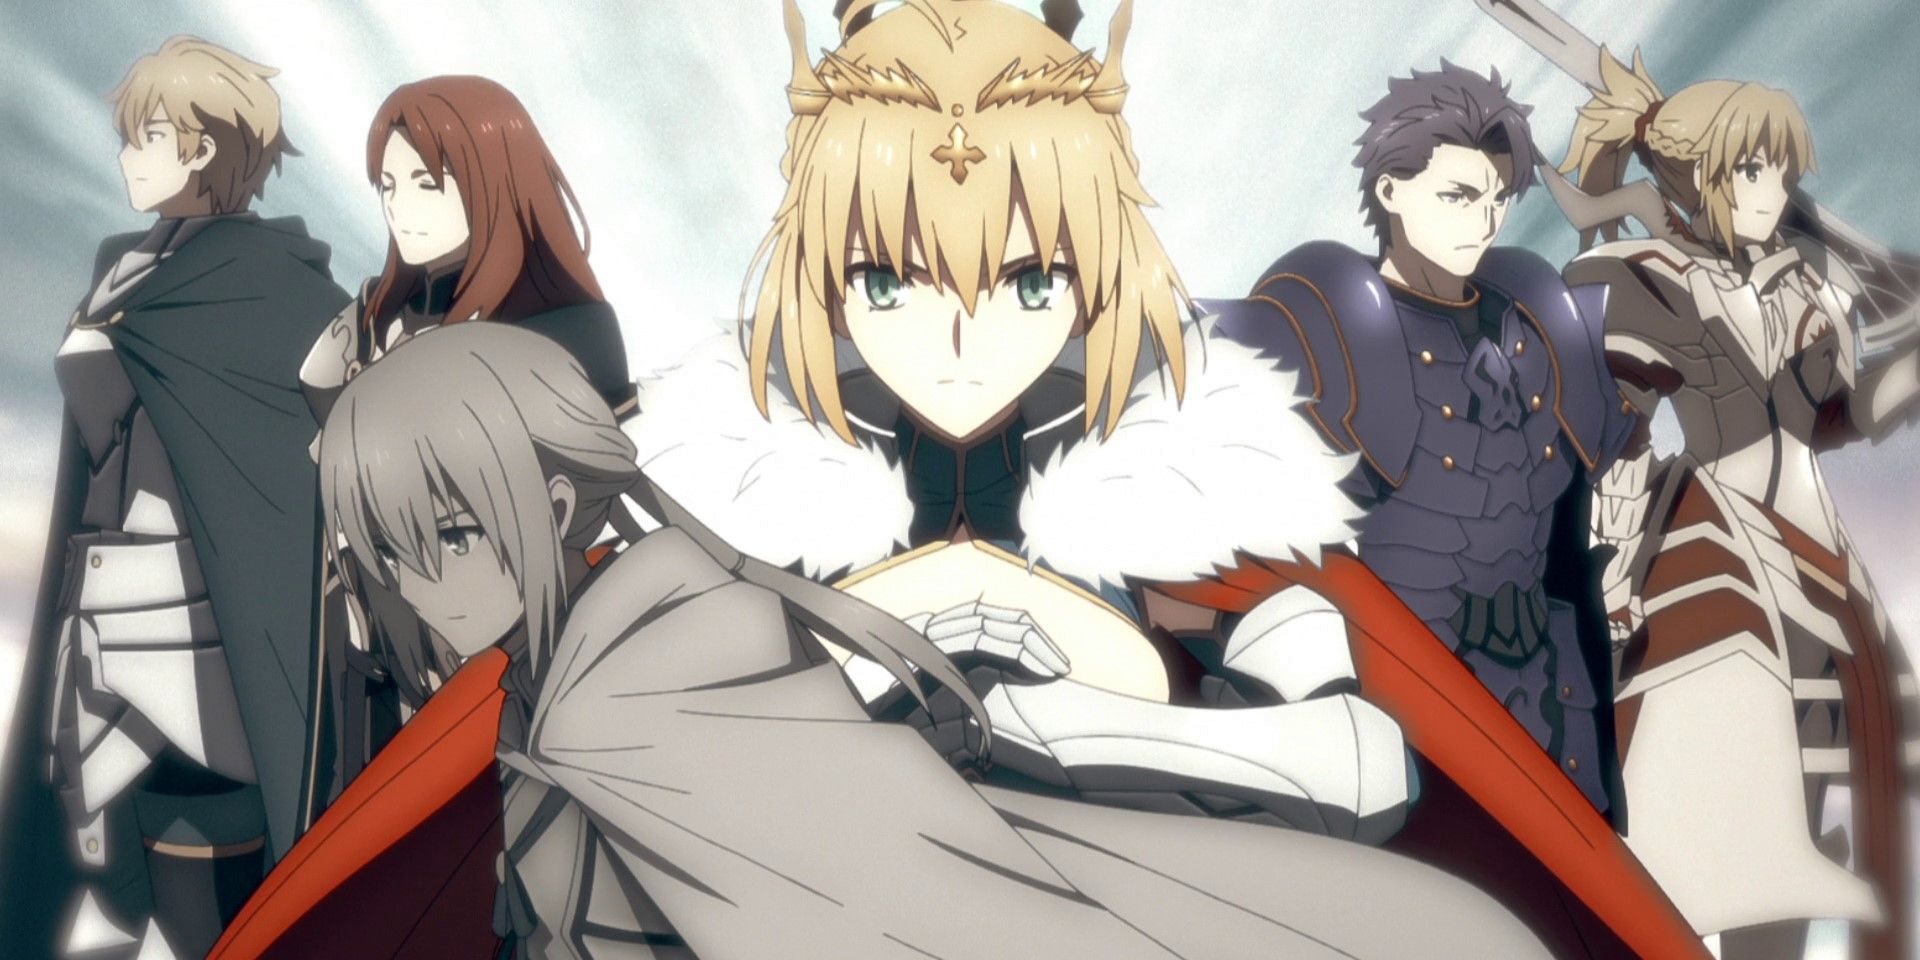 FGO The Lion King standing with Gawain, Tristan, Lancelot, Mordred, and Bedivere